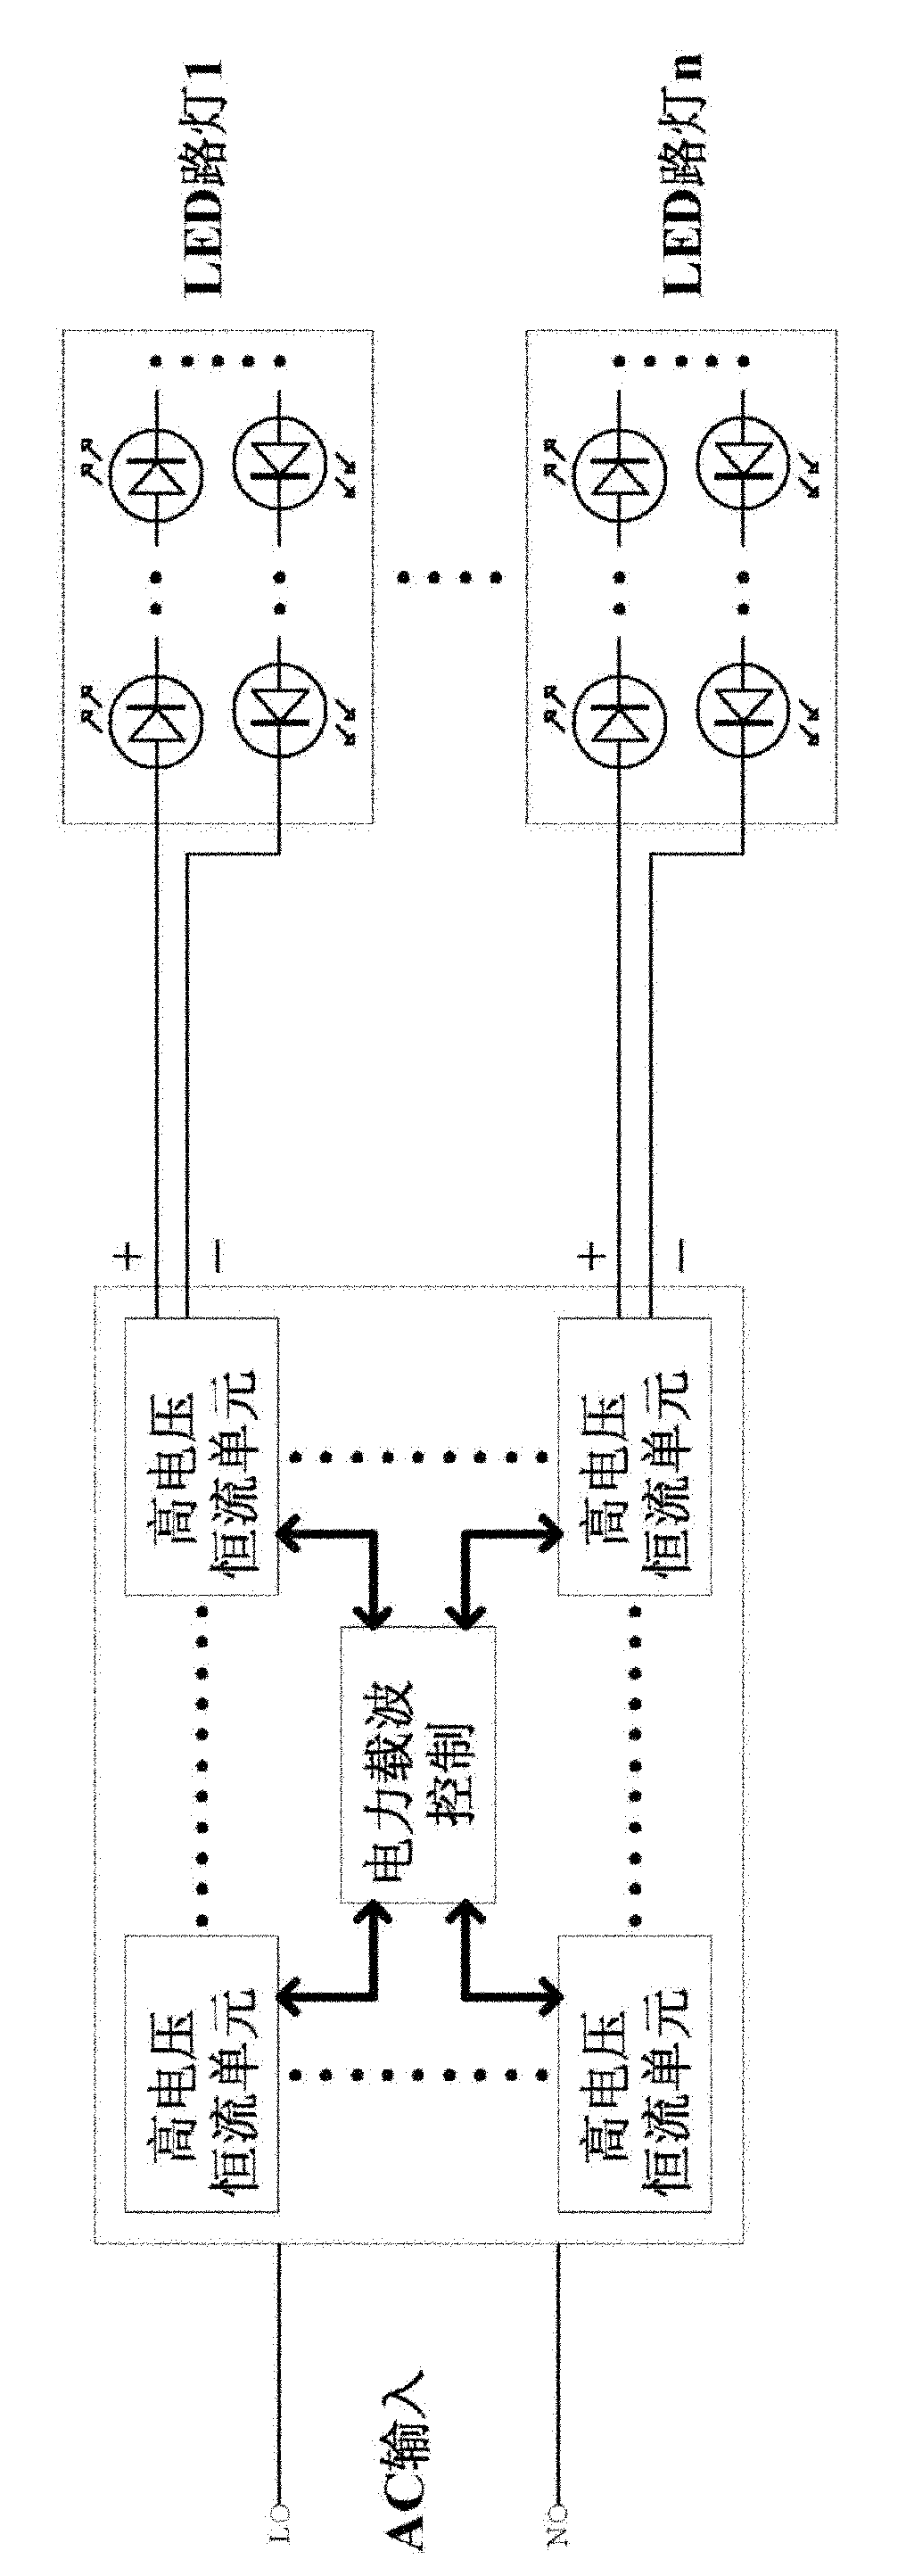 Power supply system for centralized control of LED (light emitting diode) street lamps